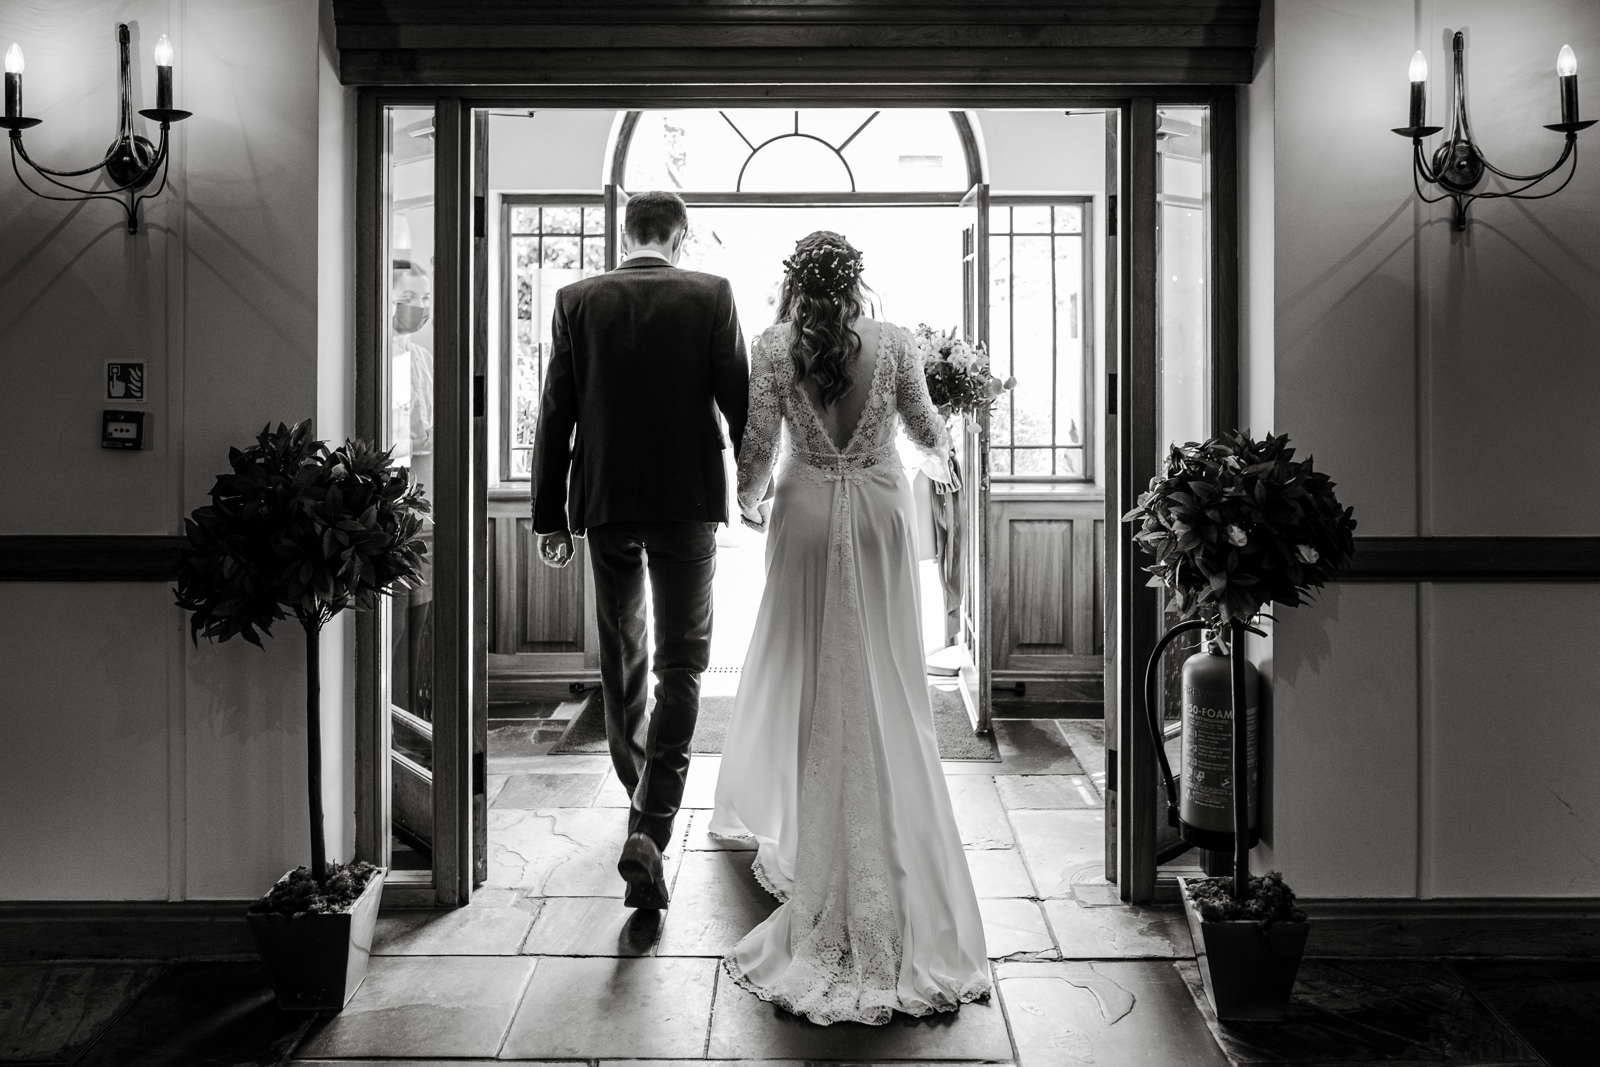 Bride and groom leaving marriage ceremony room at King Arthur Hotel, South Wales